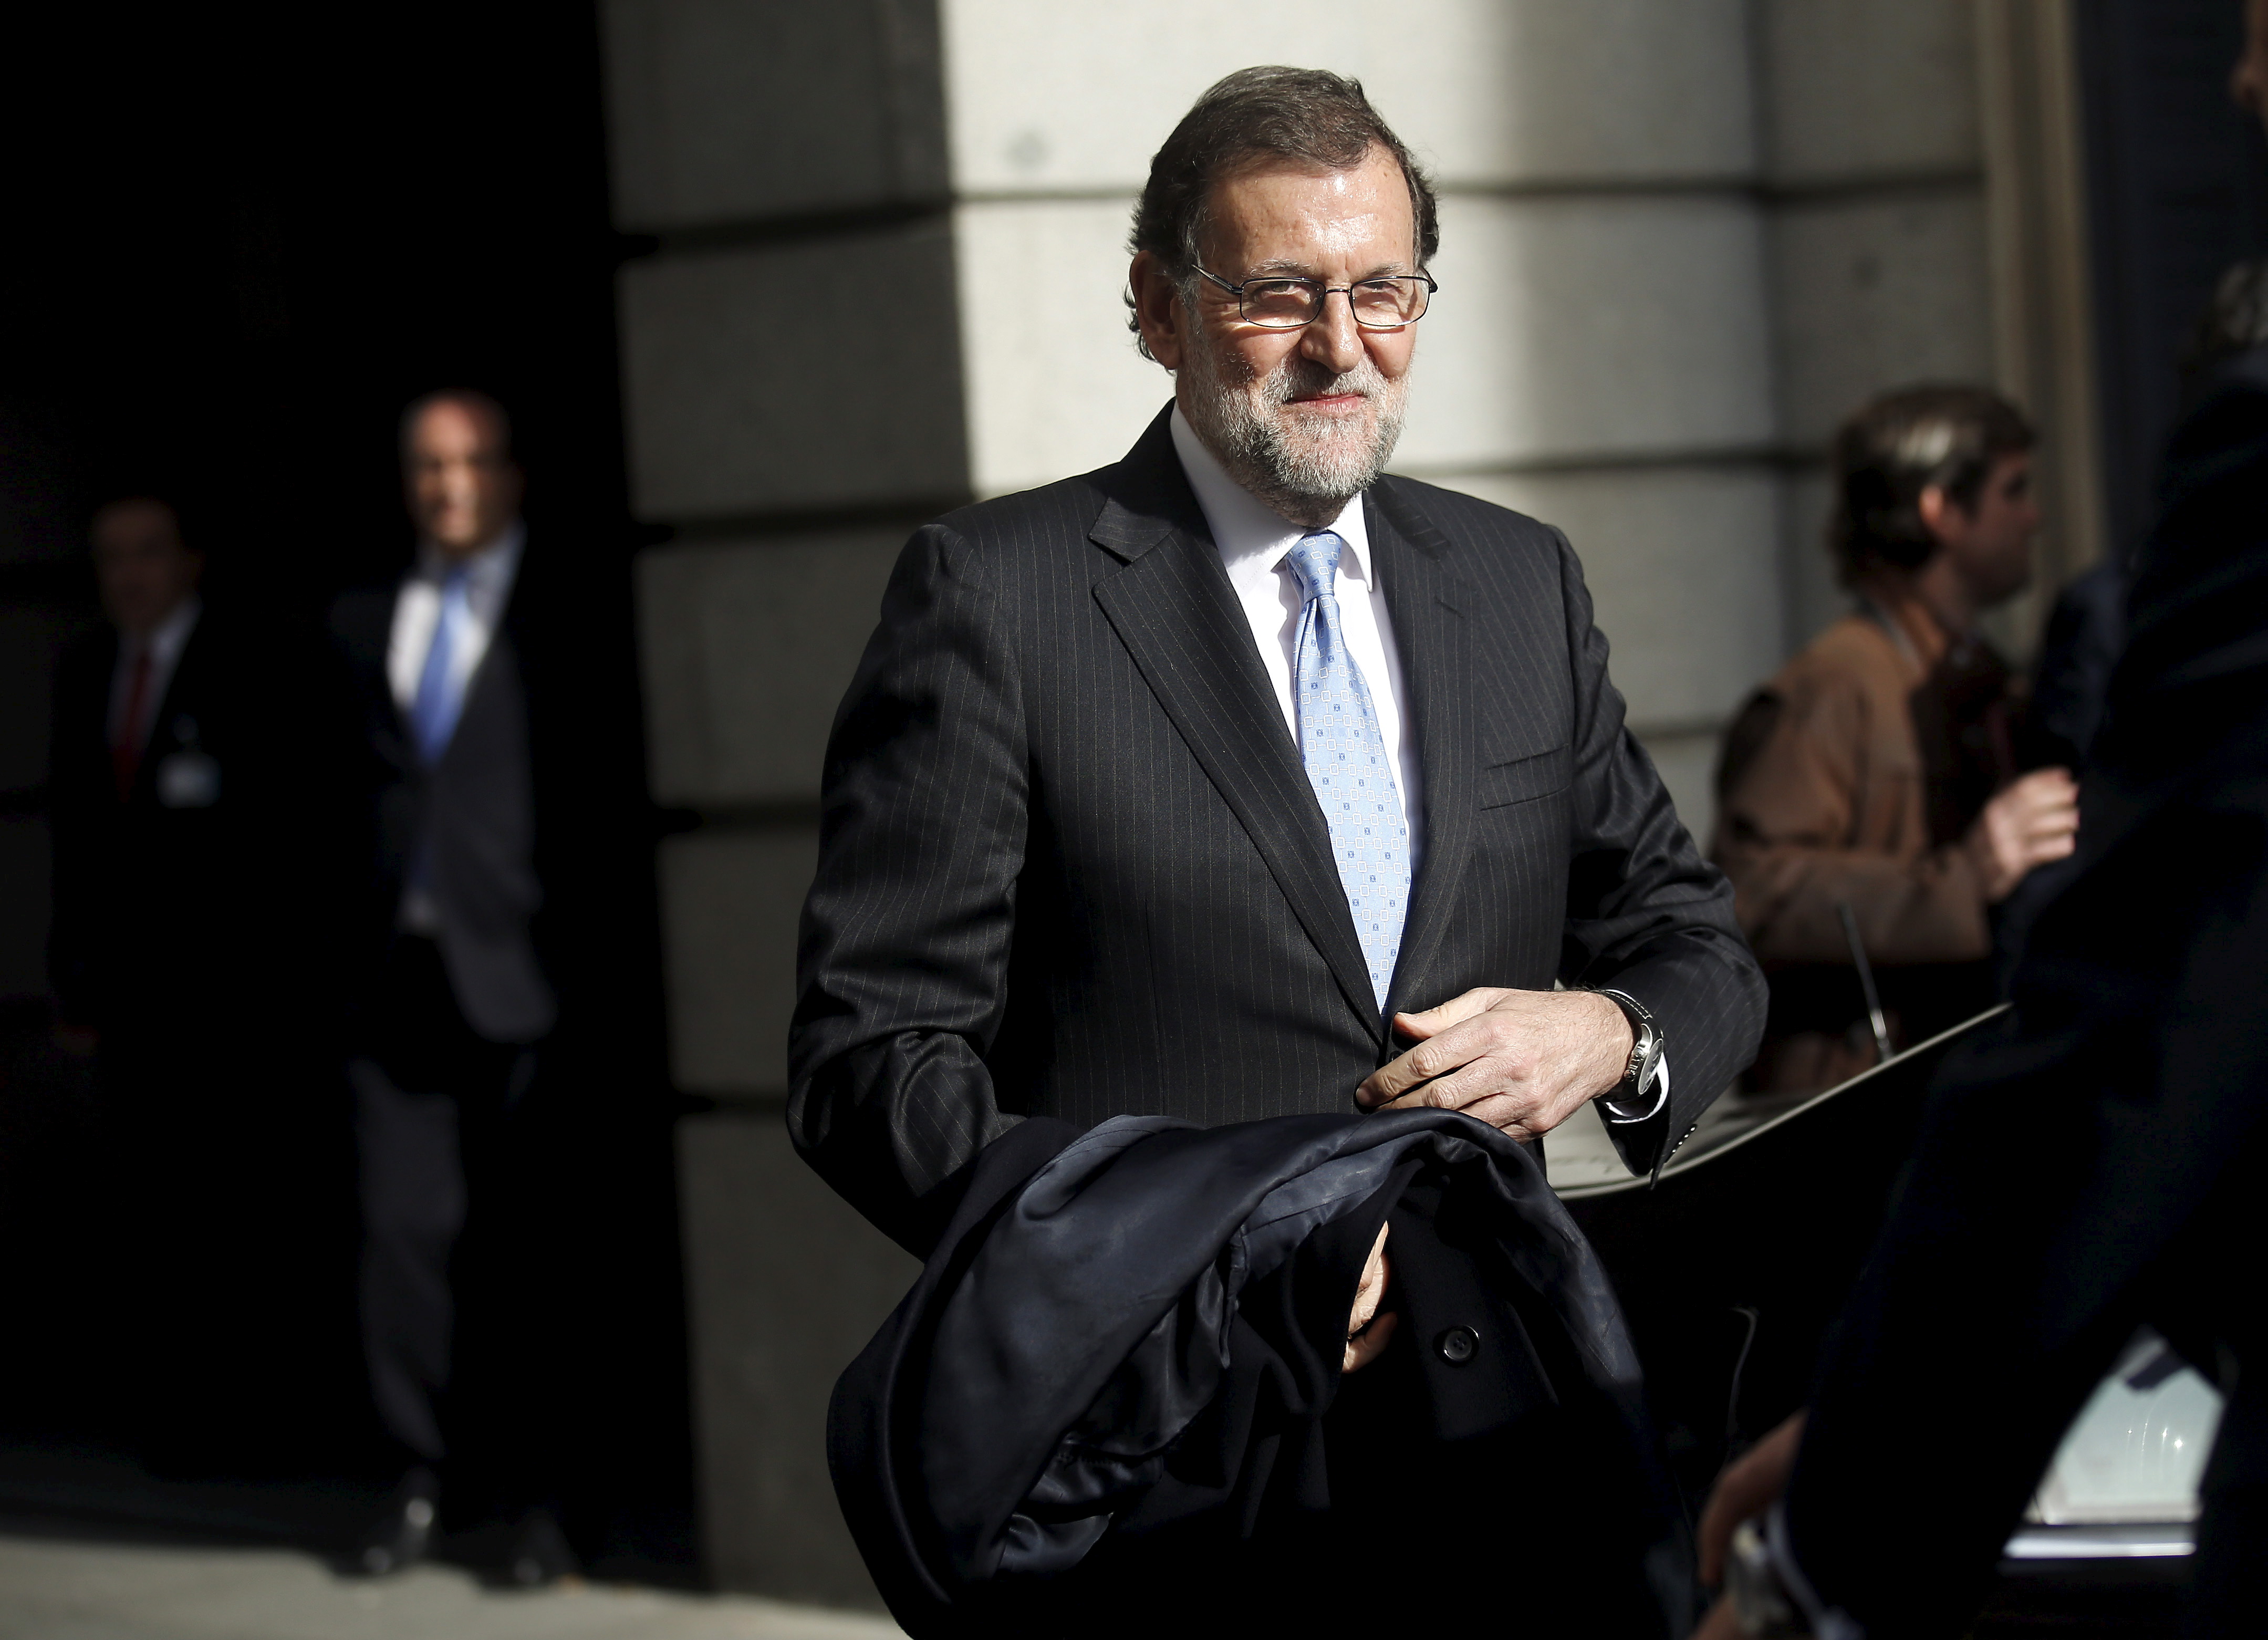 Spain's acting prime minister Mariano Rajoy leaves congress after the first session of parliament following a general election in Madrid, Spain, January 13, 2016.   REUTERS/Andrea Comas - RTX228BR